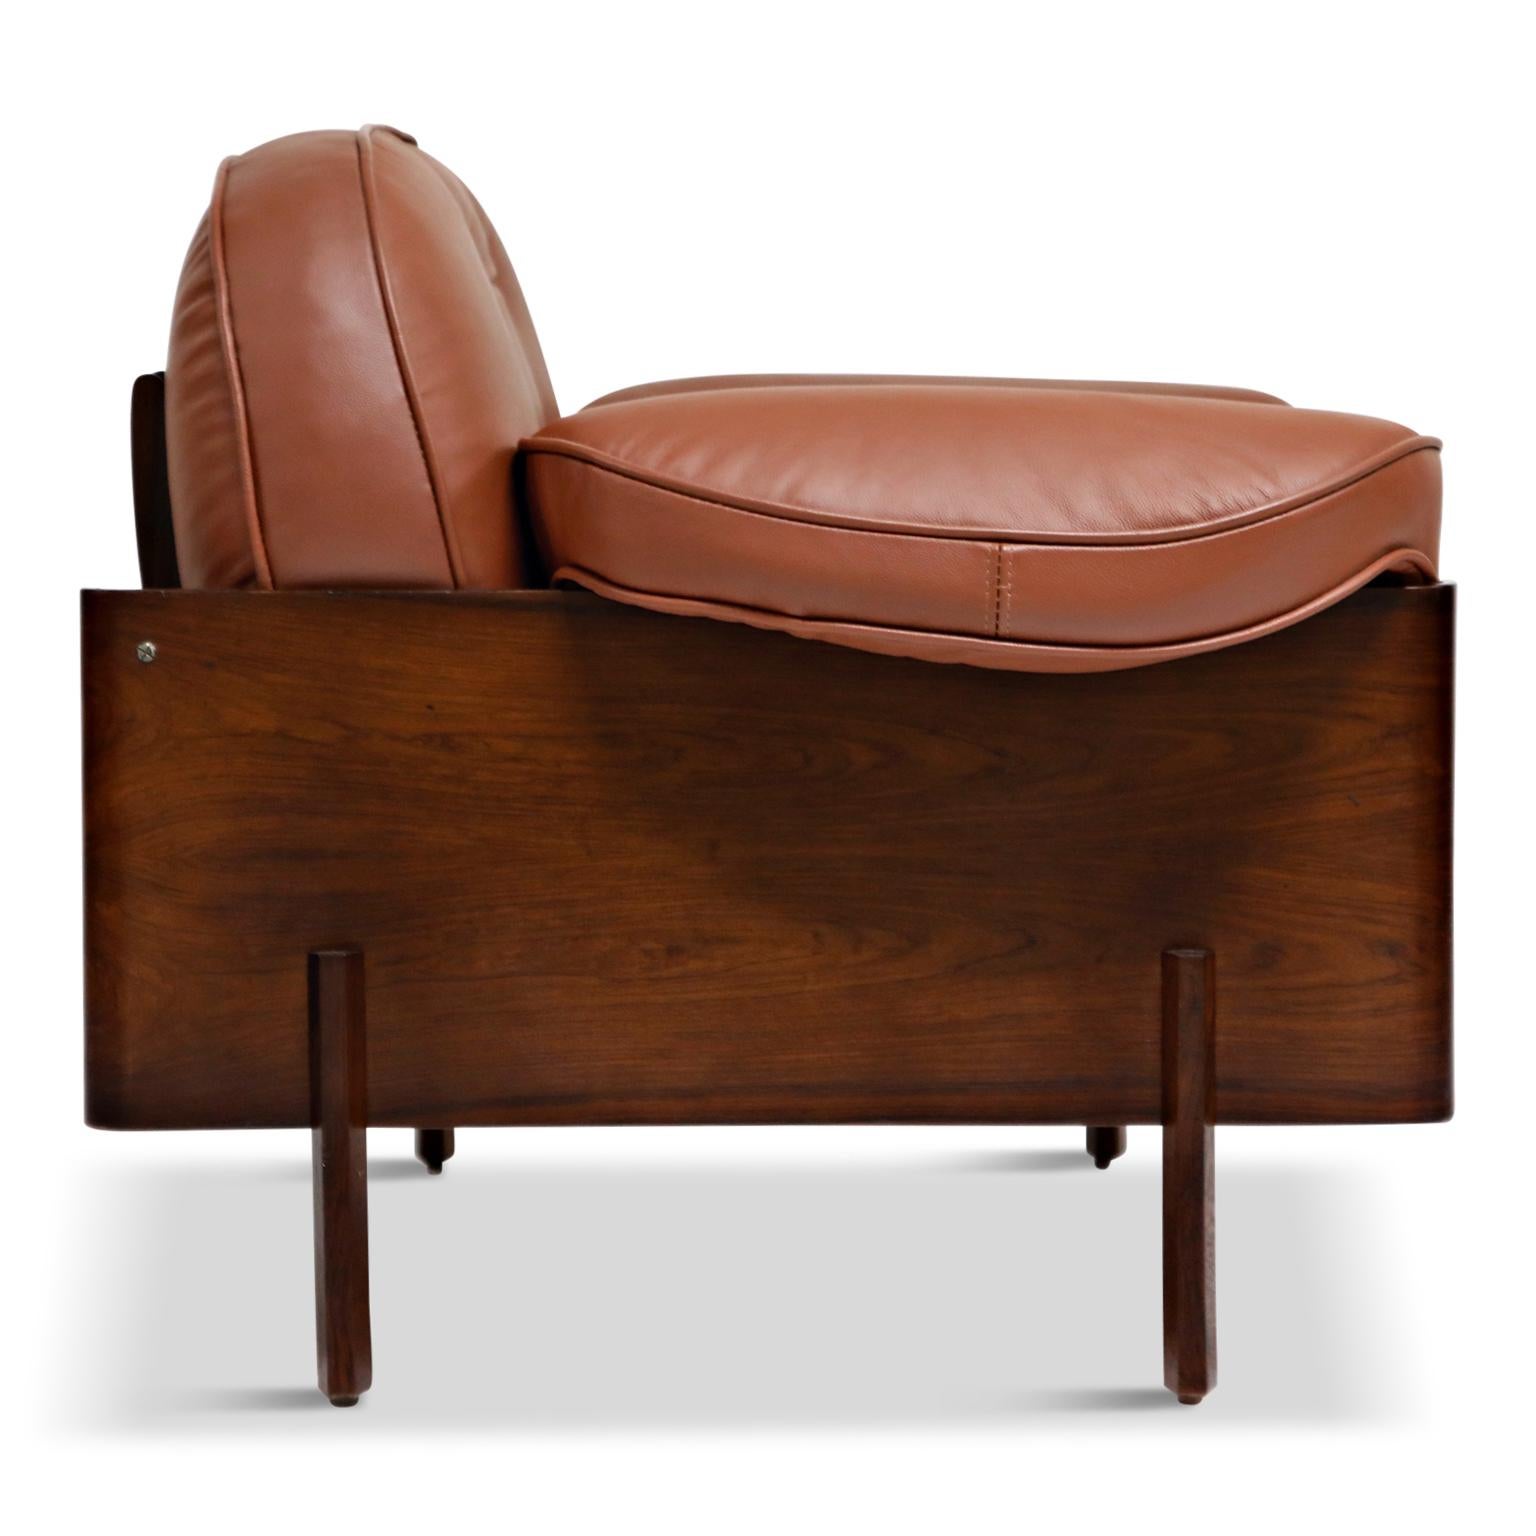 Mid-20th Century J.D. Moveis e Decoracoes Brazilian Rosewood and Leather Lounge Chair, 1960s